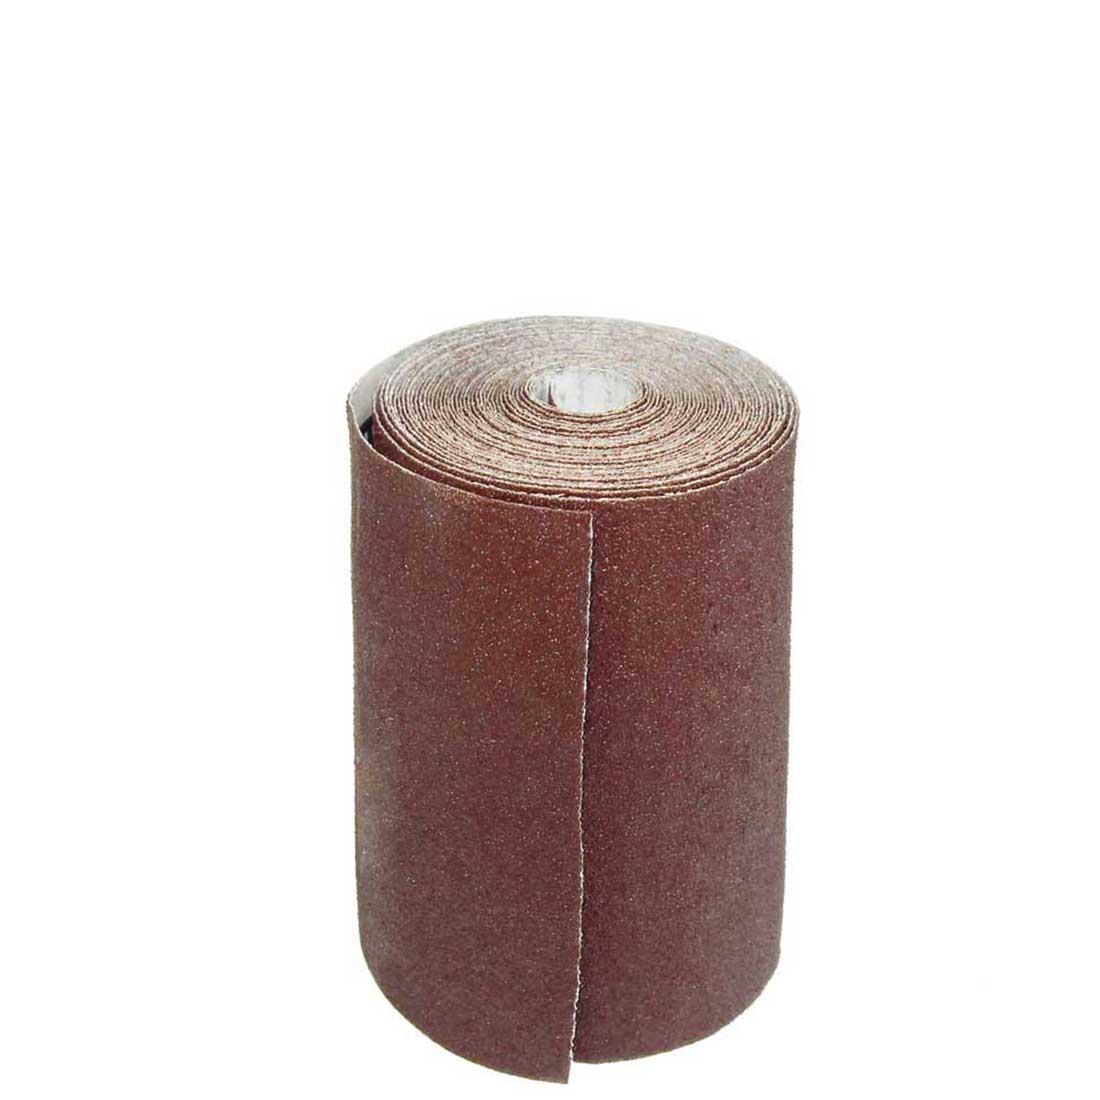 MioTools sanding paper roll for hand sanders, G40–240, 93 mm x 5 m / aluminium oxide